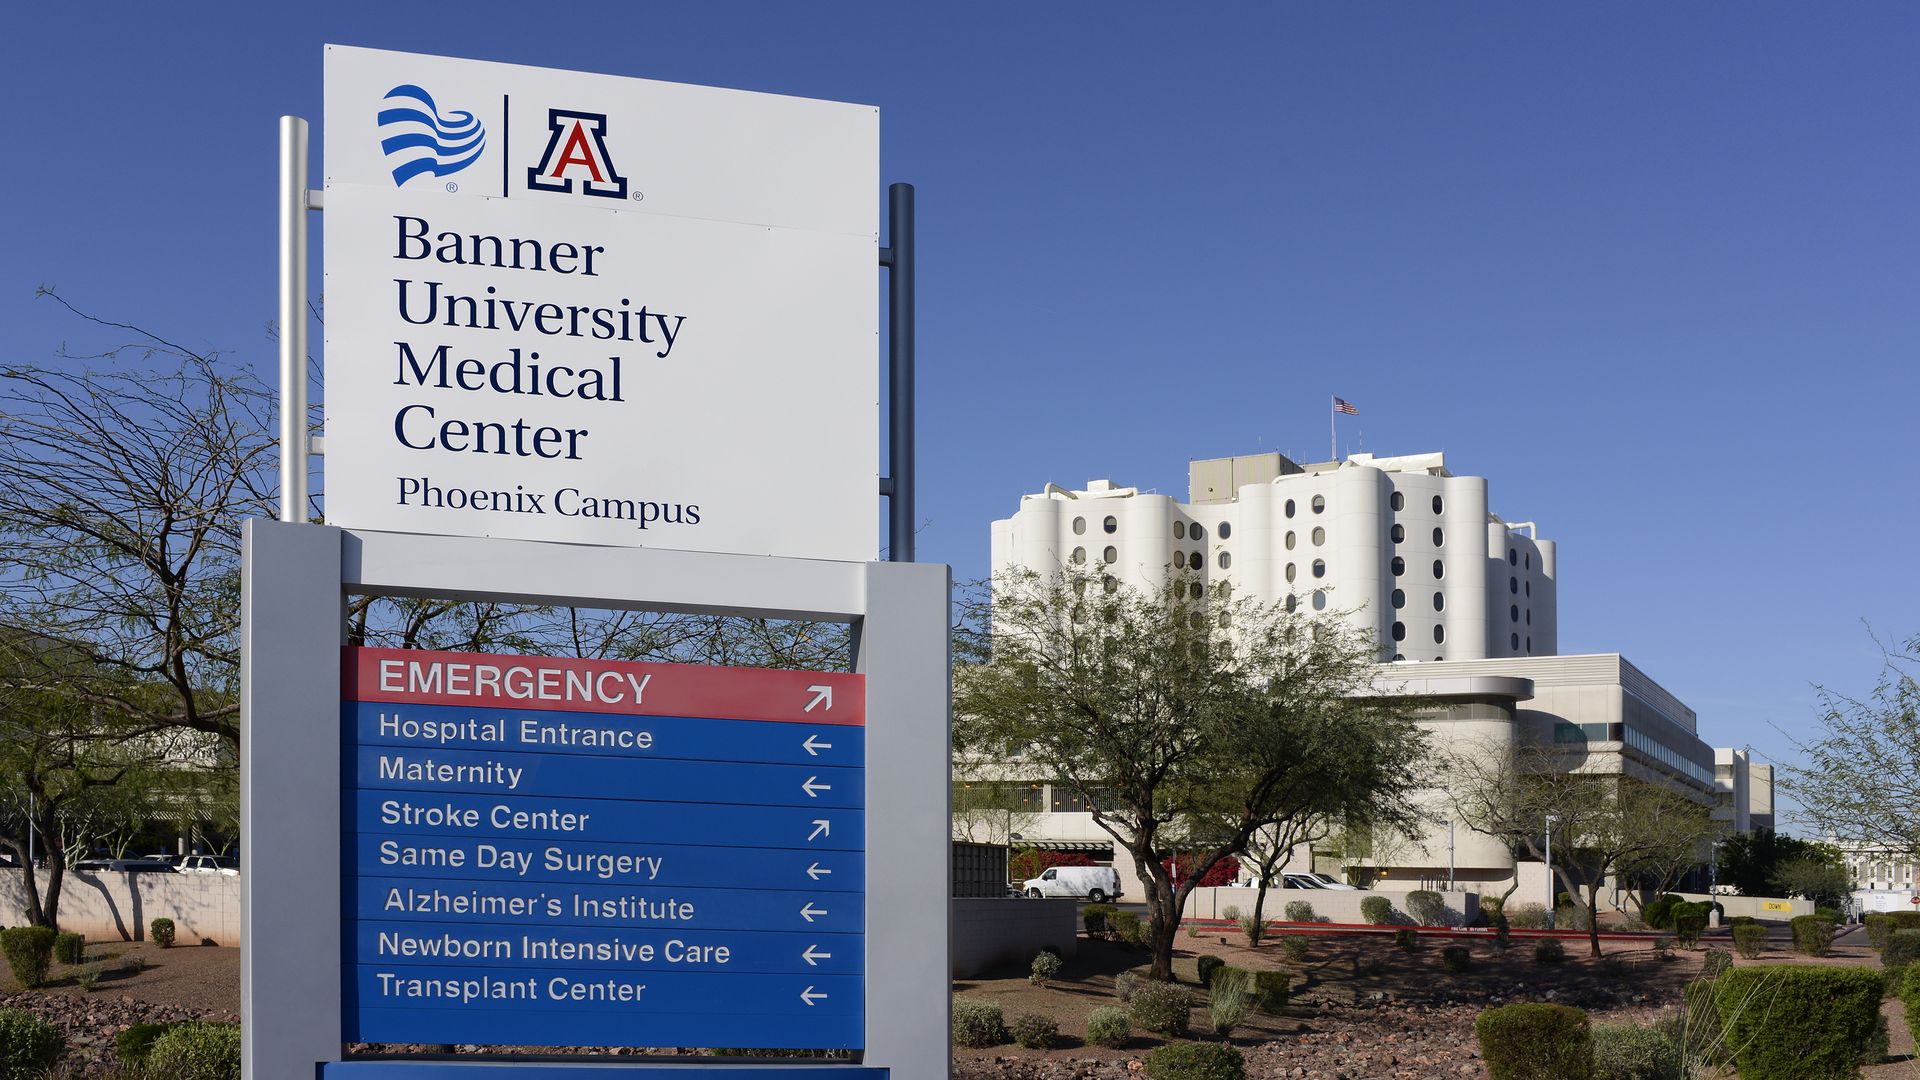 A sign showing directions around the Banner University Medical Center.